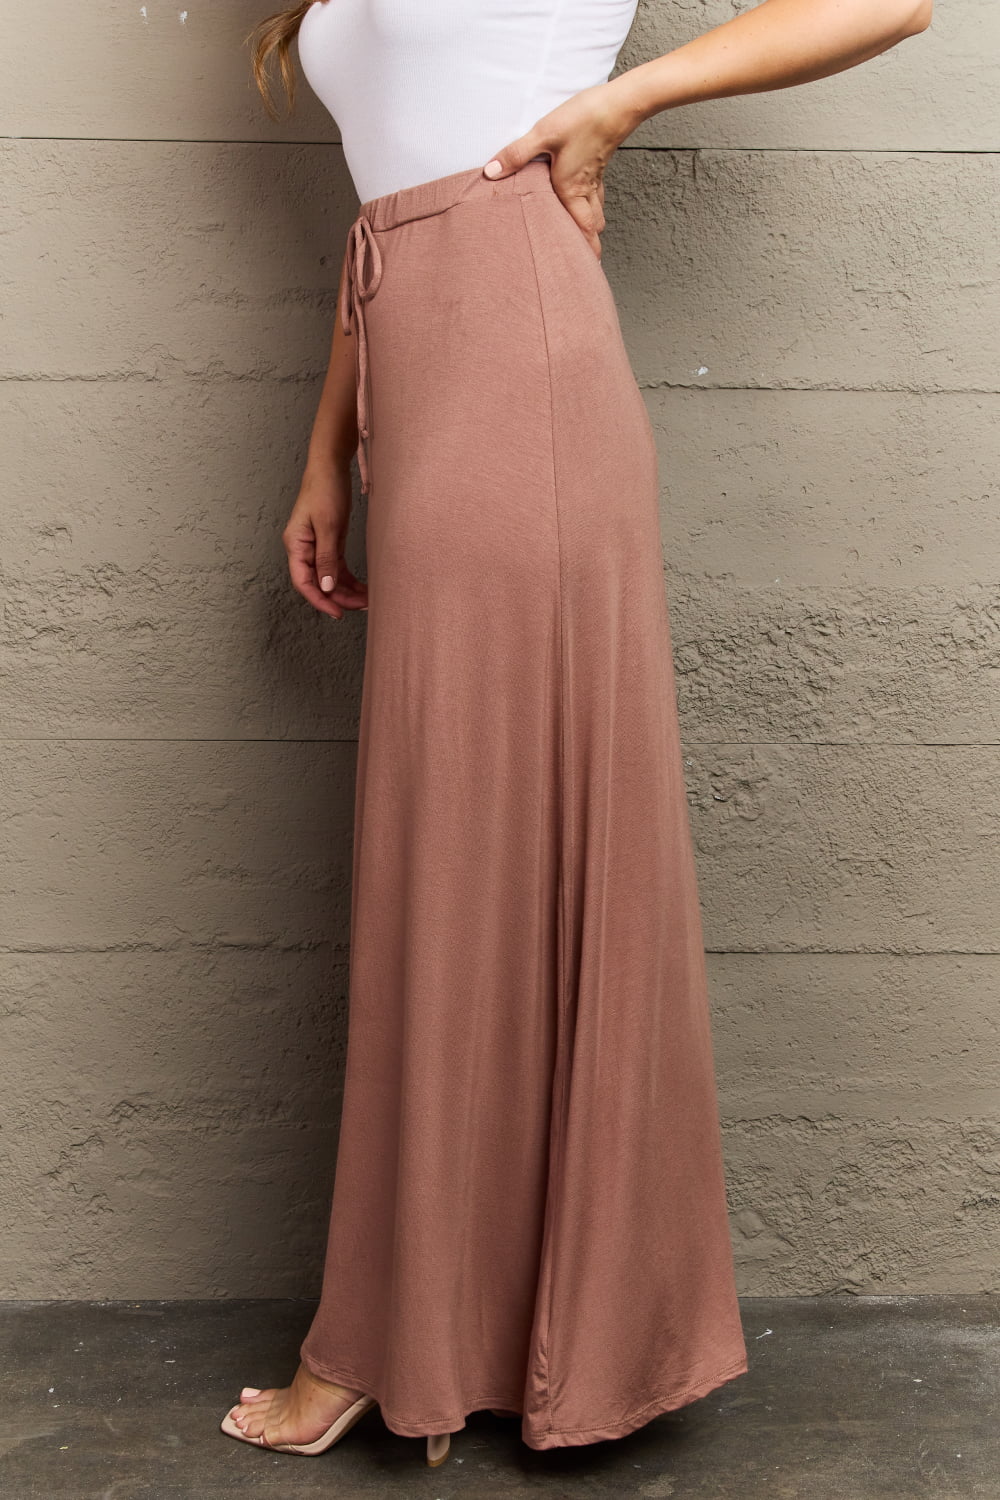 The Day Flare Maxi Skirt in Chocolate